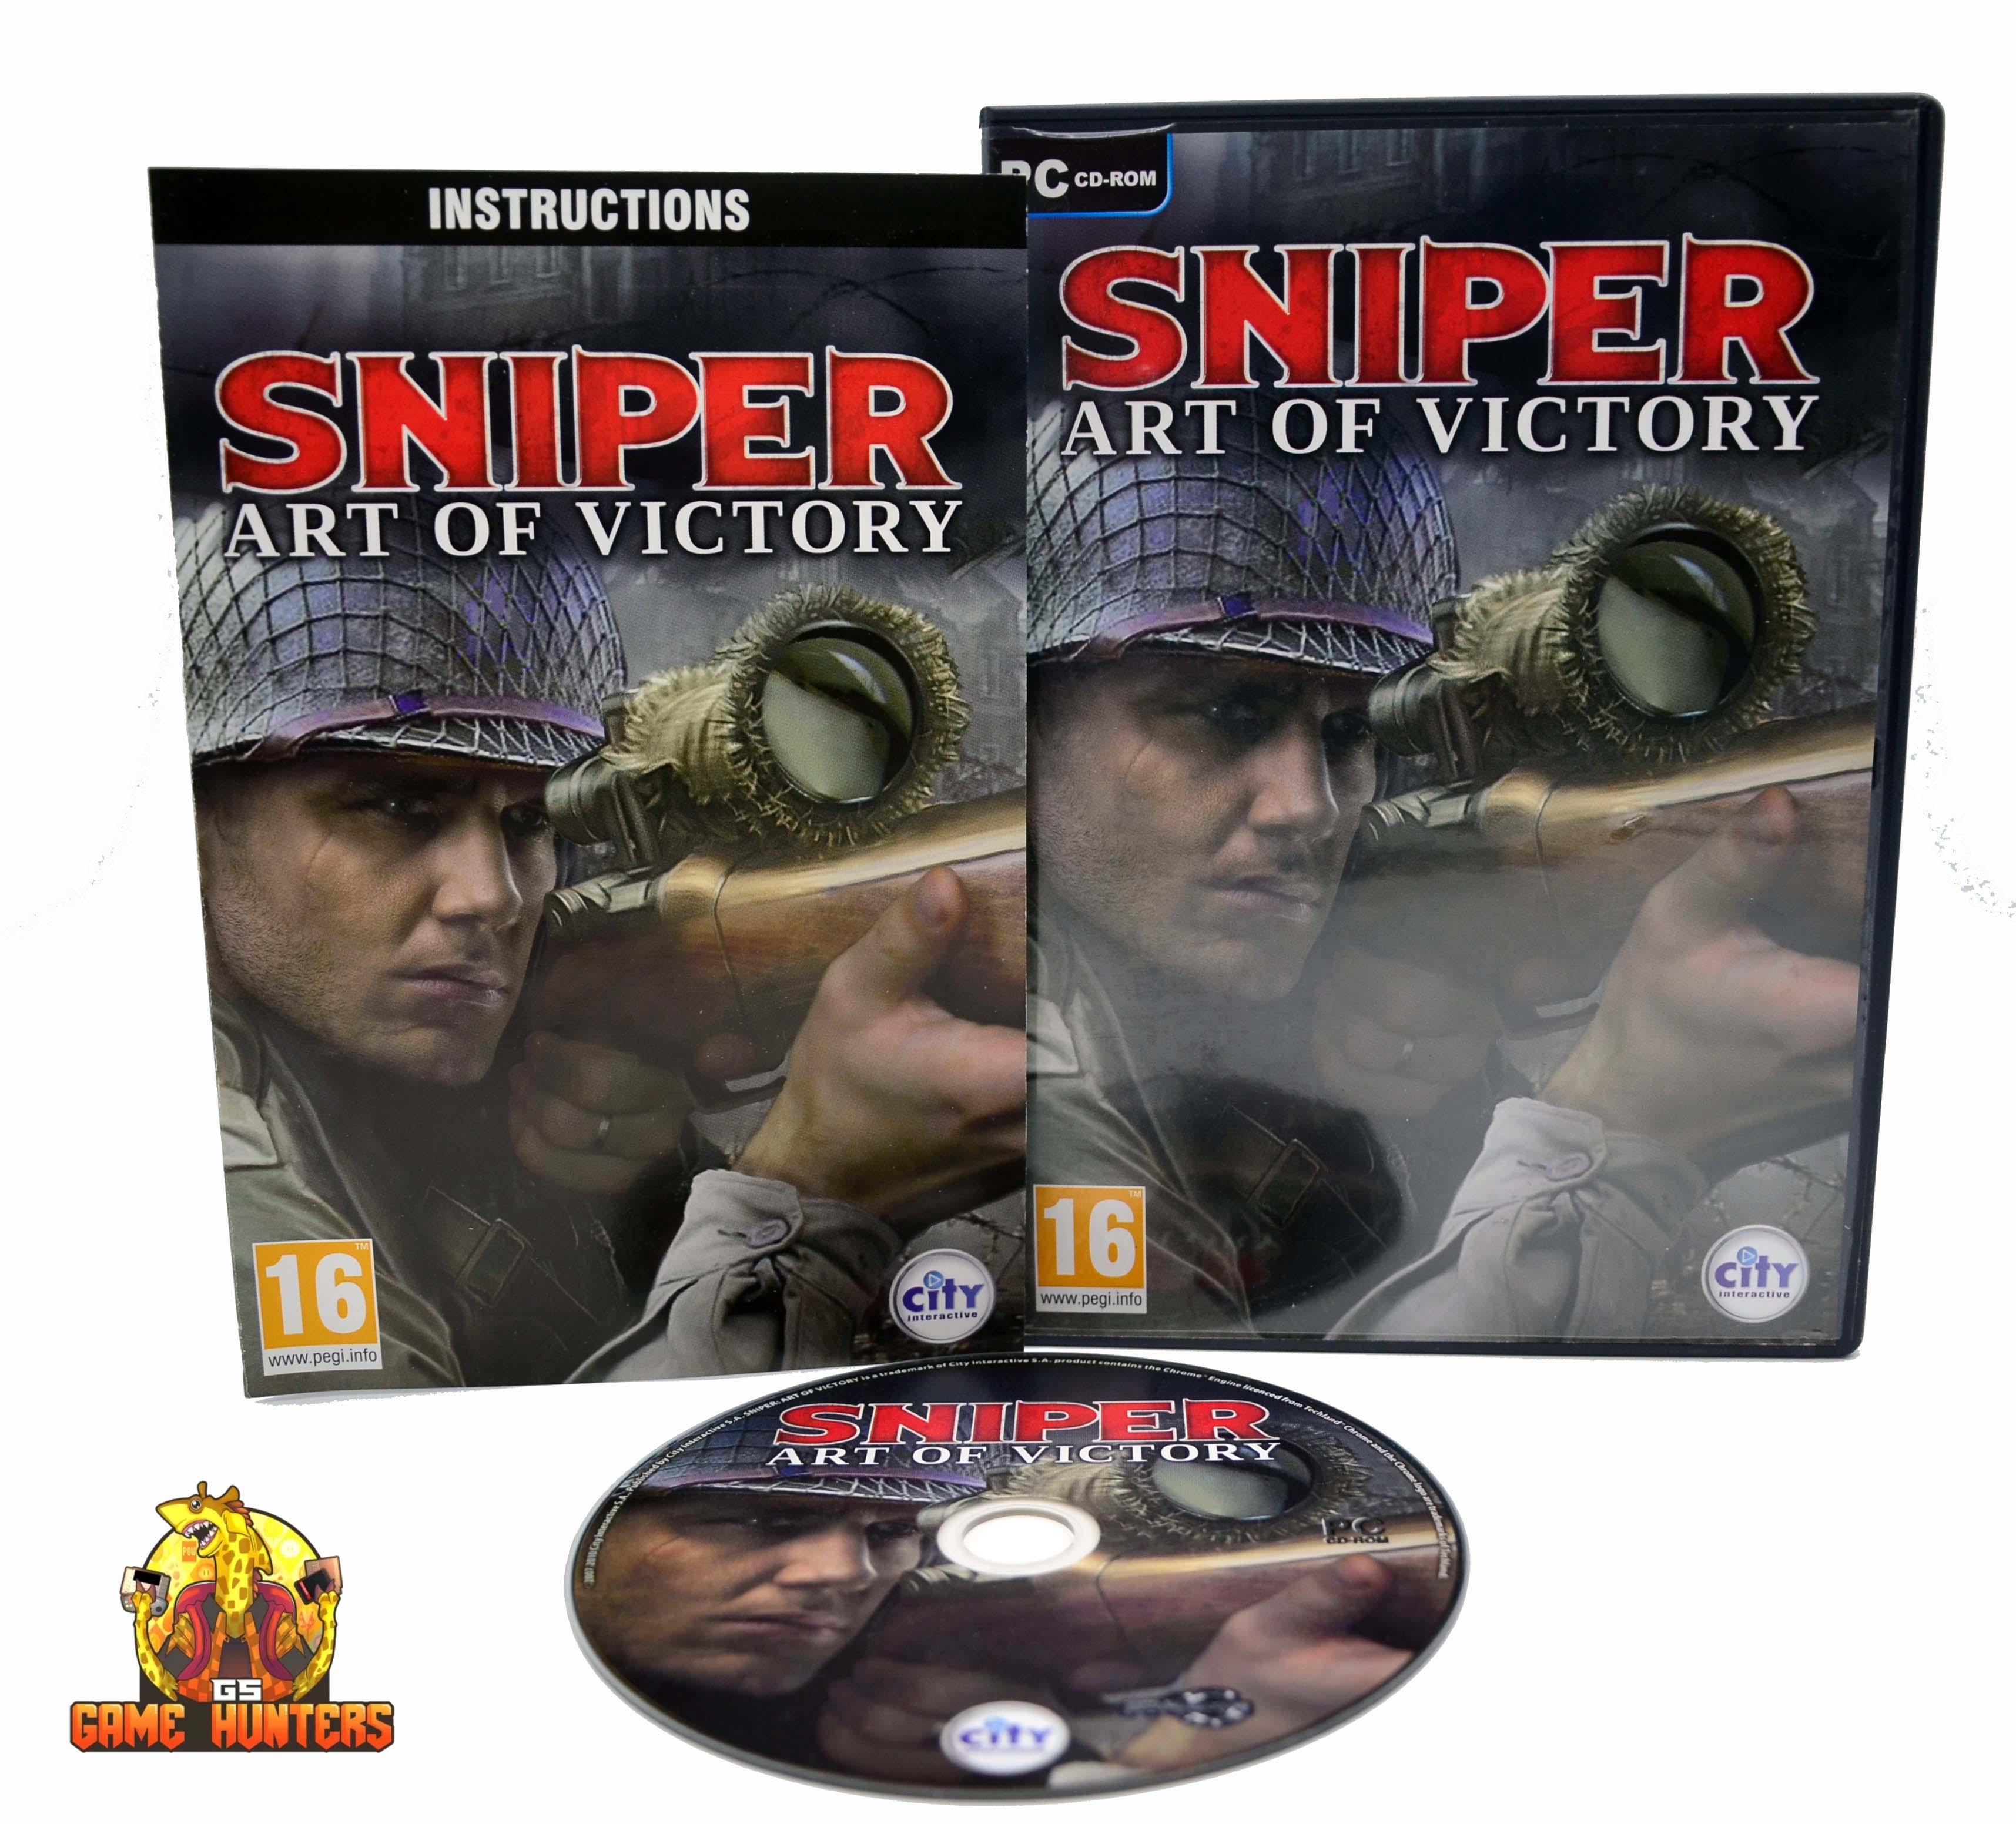 Sniper Art of Victory Case, Manual & Disc.jpg  by GSGAMEHUNTERS